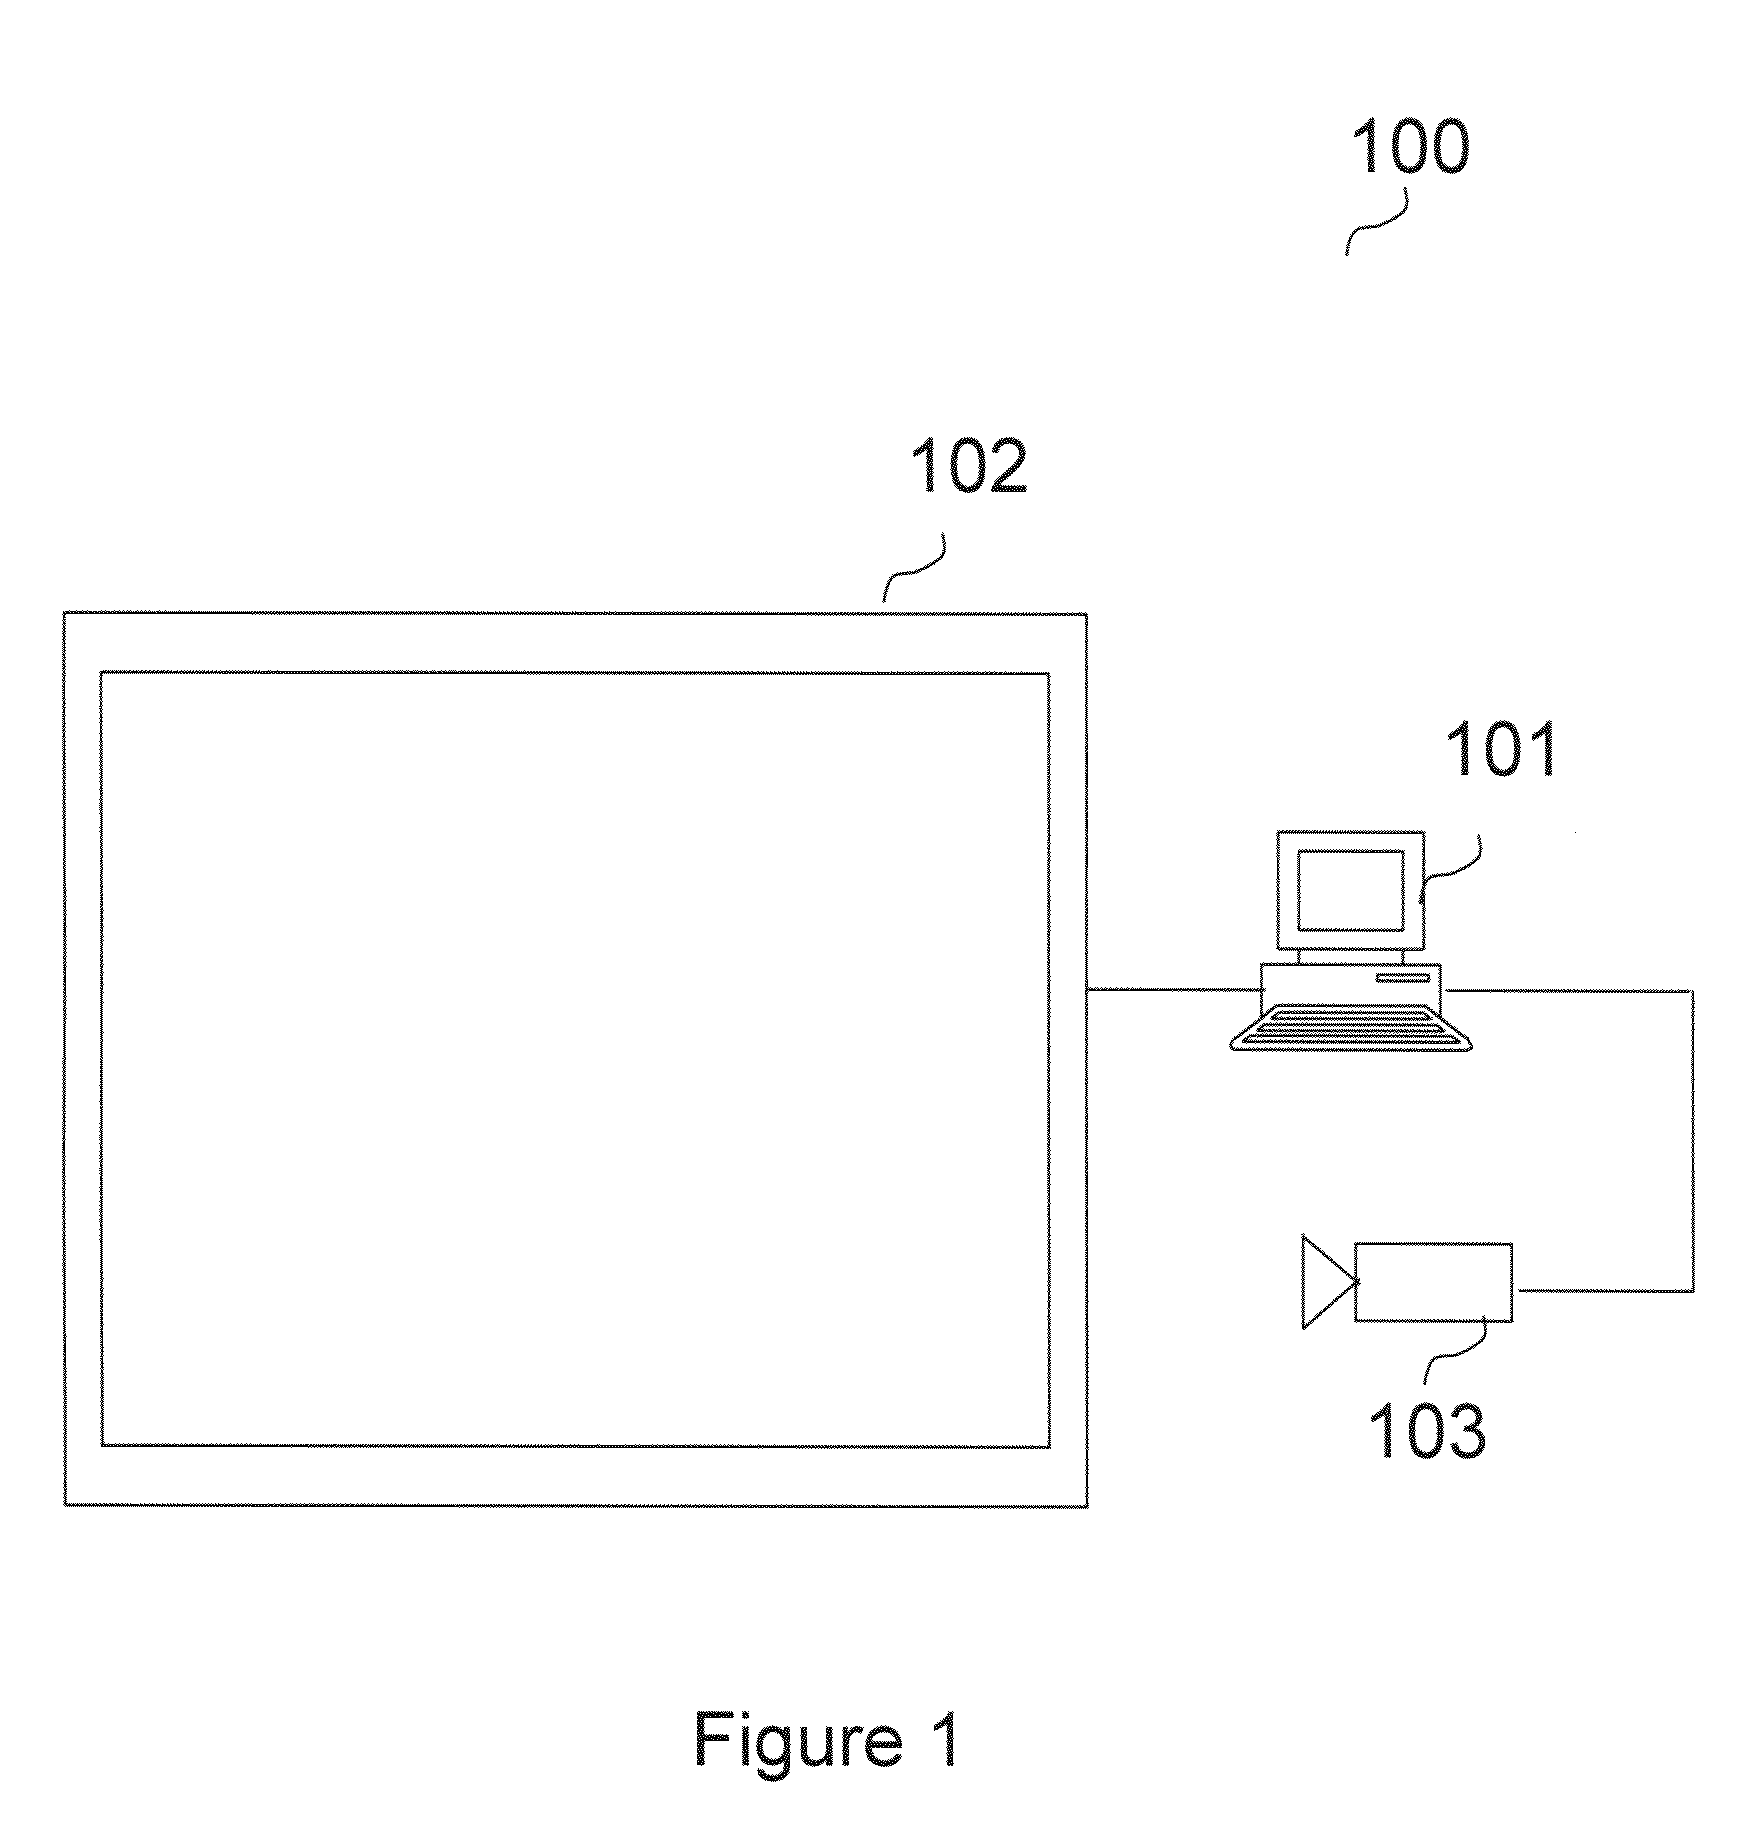 System and method for panning and selecting on large displays using mobile devices without client software